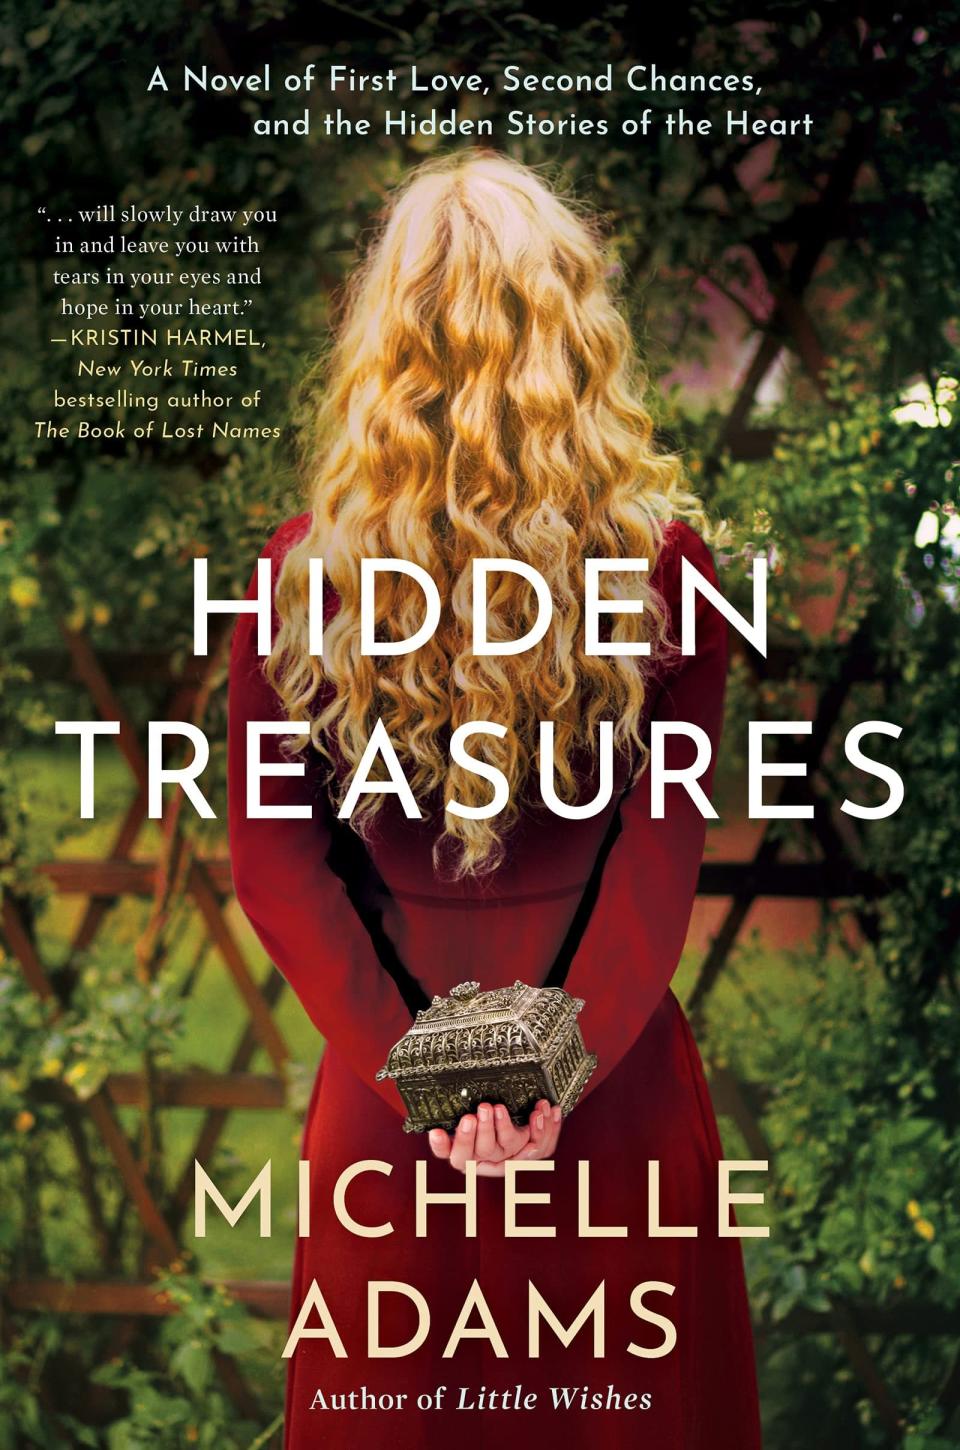 <p><span><strong>Hidden Treasures</strong></span> by Michelle Adams is a moving love story that spans two timelines. In the past, Frances Langley hid a precious object stolen by the Nazis. Meanwhile, in the present, her son and his first love reunite to find the object, a jewelry box, and uncover his mother's extraordinary story. </p> <p><em>Out Dec. 7</em></p>